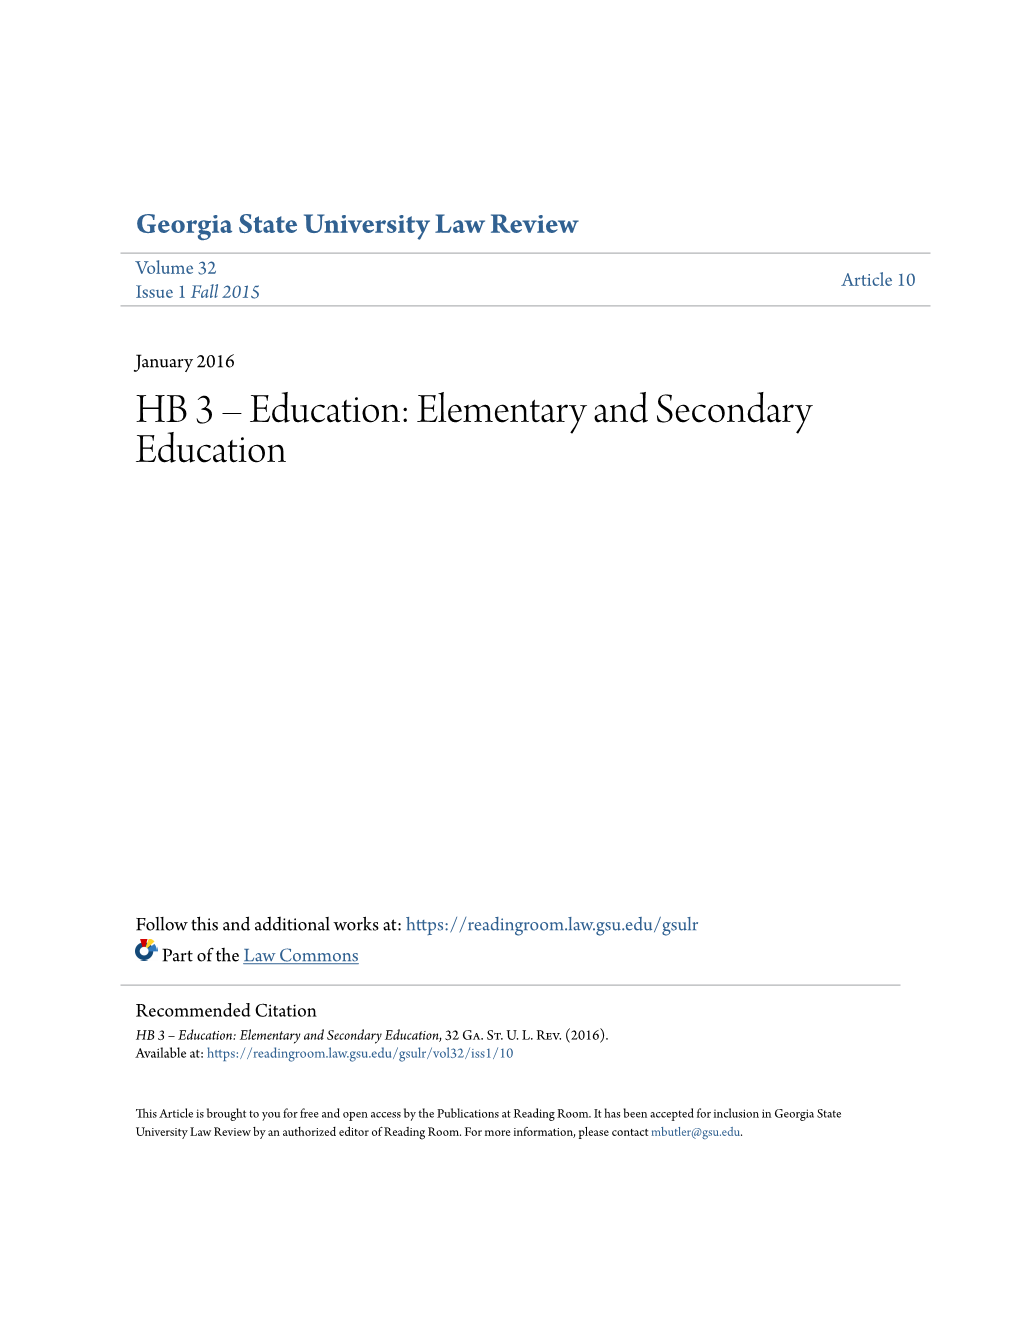 HB 3 – Education: Elementary and Secondary Education